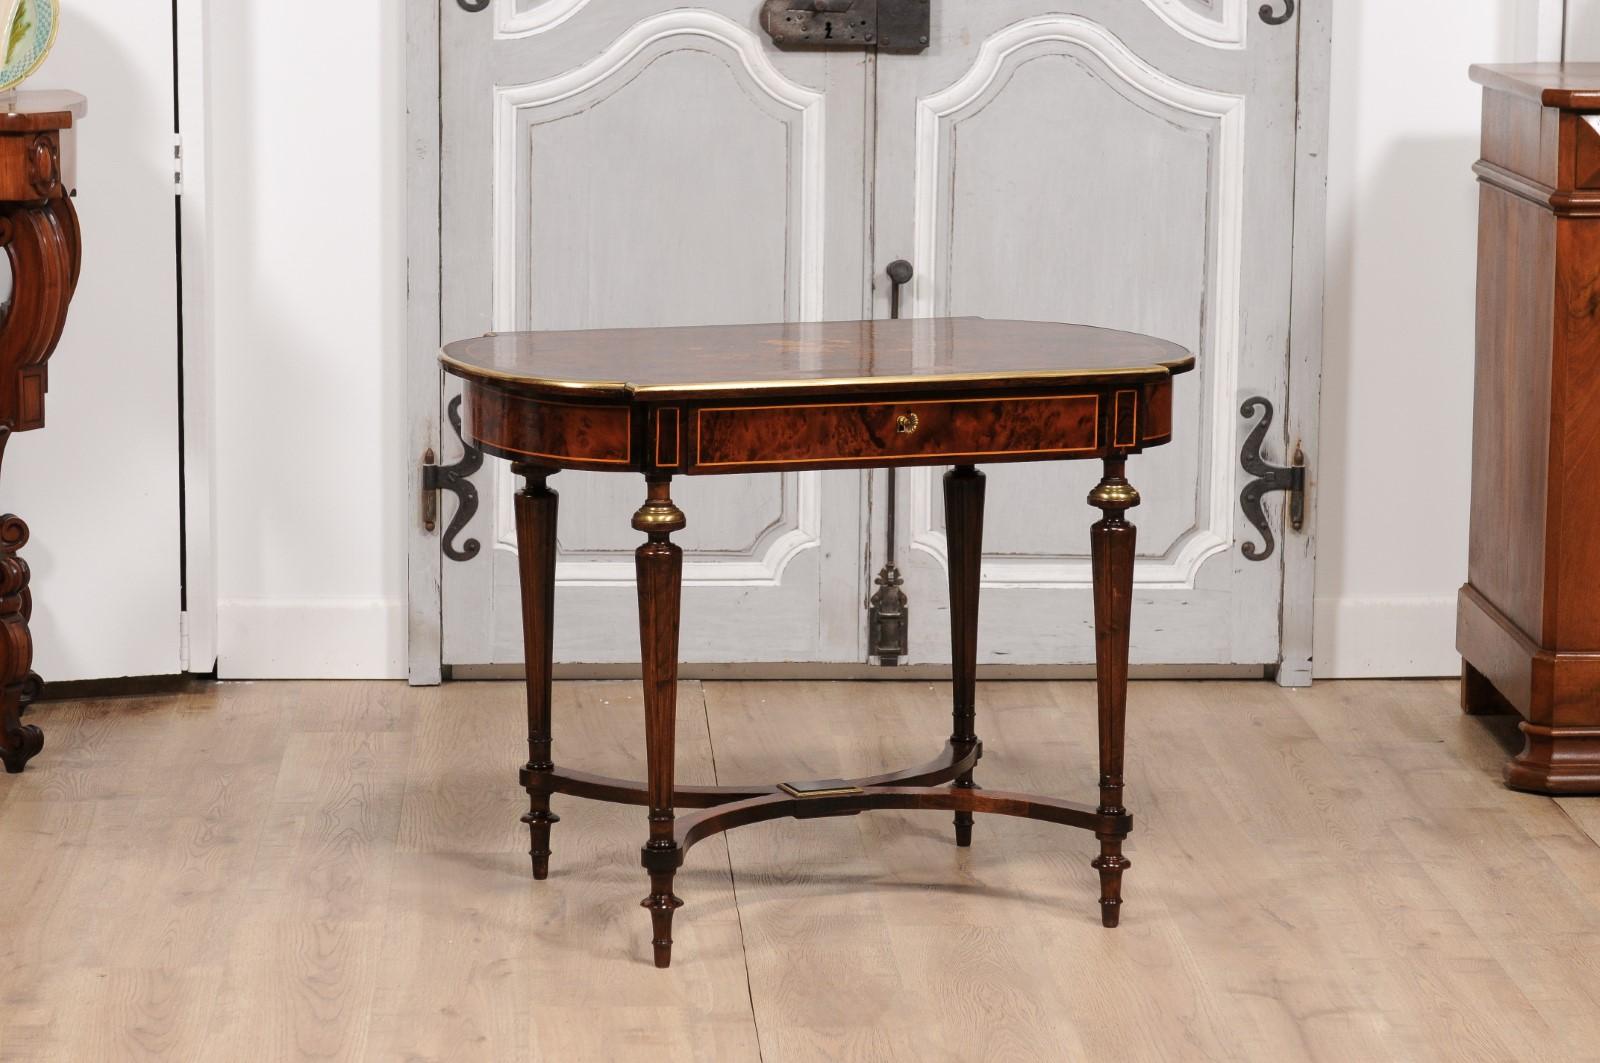 Italian 1890s Walnut, Mahogany and Brass Side Table with Floral Marquetry Décor In Good Condition For Sale In Atlanta, GA